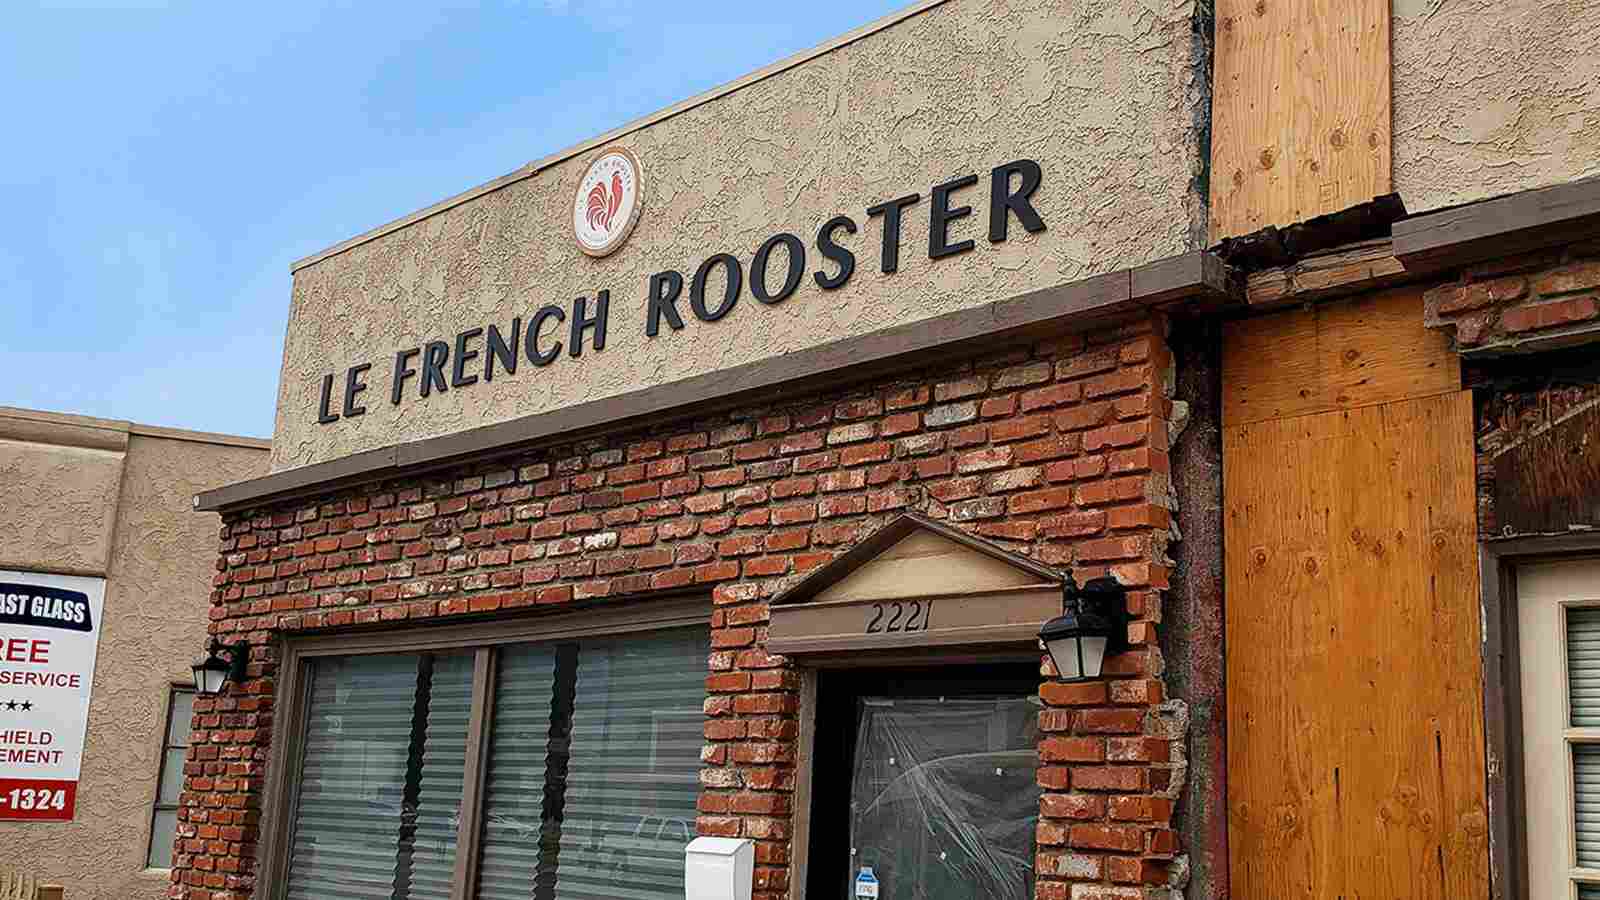 le-french-rooster-3d-letters-sign